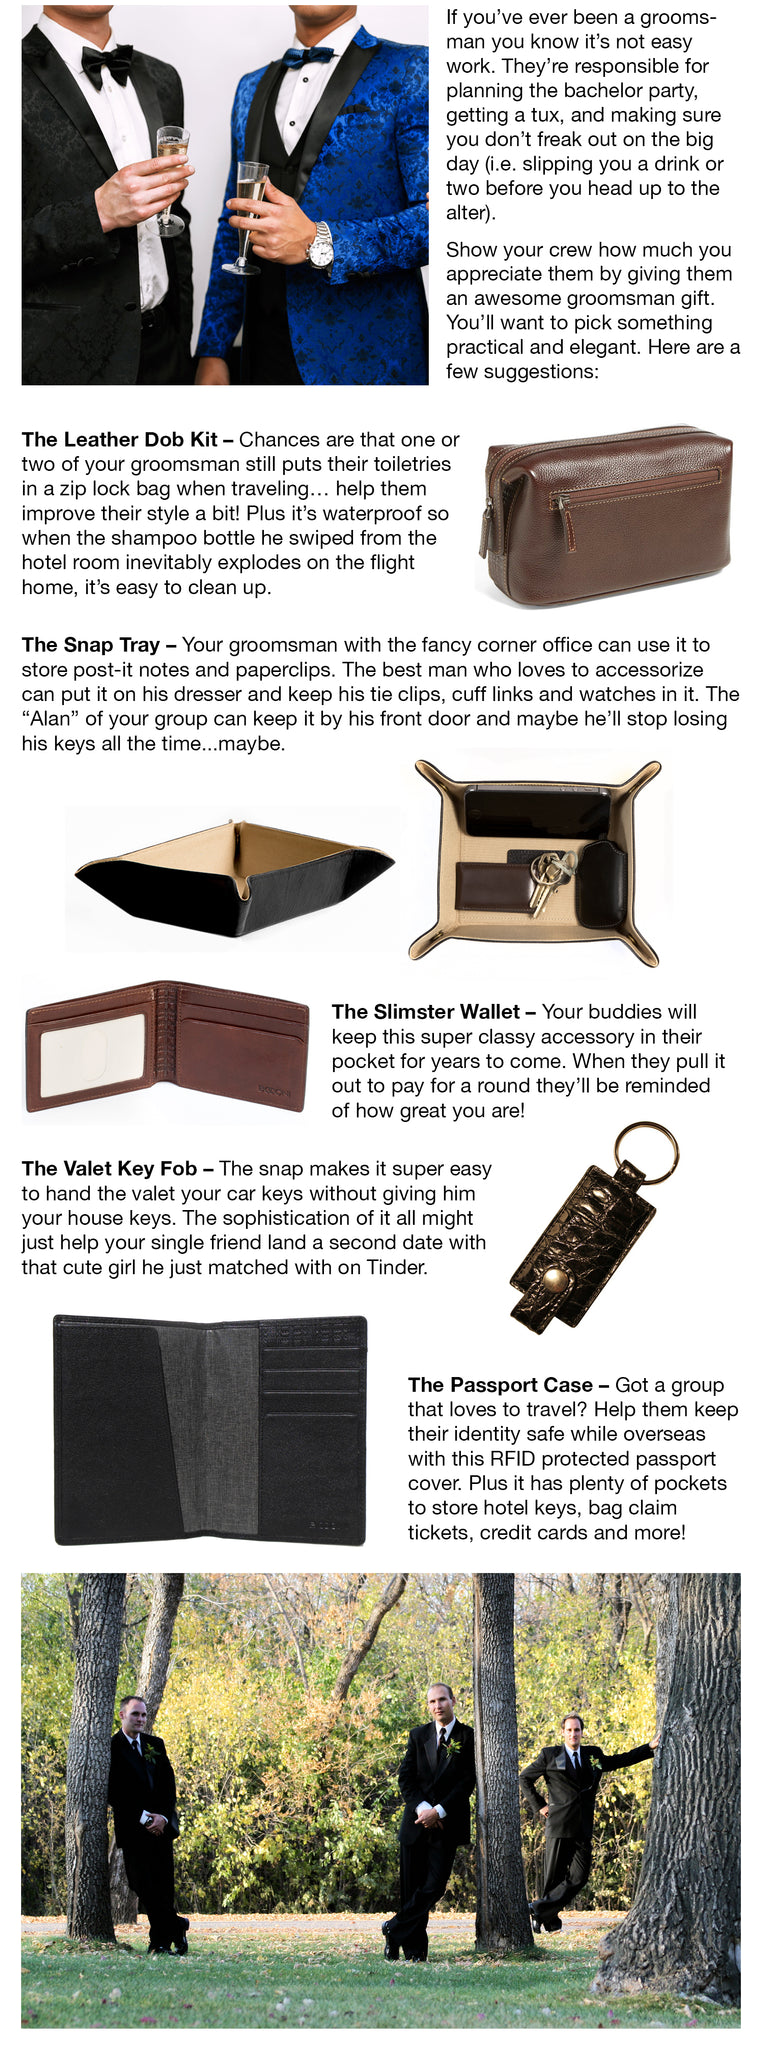 Make sure you show your crew how much you appreciate them by giving them an awesome groomsman gift. You’ll want to pick something practical and elegant. Here are a few suggestions:  1.	The Leather Dob Kit – Chances are that one or two of your groomsman still puts their toiletries in a zip lock bag when traveling… help them improve their style a bit! Plus it’s waterproof so when the shampoo bottle he swiped from the hotel room inevitably explodes on the flight home, it’s easy to clean up.  2.	The Slimster Wallet – Your buddies will keep this super classy accessory in their pocket for years to come. When they pull it out to pay for a round they’ll be reminded of how great you are!  3.	The Snap Tray – Your groomsman with the fancy corner office can use it to store post-it notes and paperclips. The best man who loves to accessorize can put it on his dresser and keep his tie clips, cuff links and watches in it. The “Alan” of your group can keep it by his front door and maybe then he’ll stop losing his keys all the time...maybe. 4.	The Valet Key Fob – The snap makes it super easy to hand the valet your car keys without giving him your house keys. The sophistication of it all might just help your single friend land a second date with that cute girl he just matched with on Tinder. 5.	The Passport Case – Got a group that loves to travel? Help them keep their identity safe while overseas with this RFID protected passport cover.